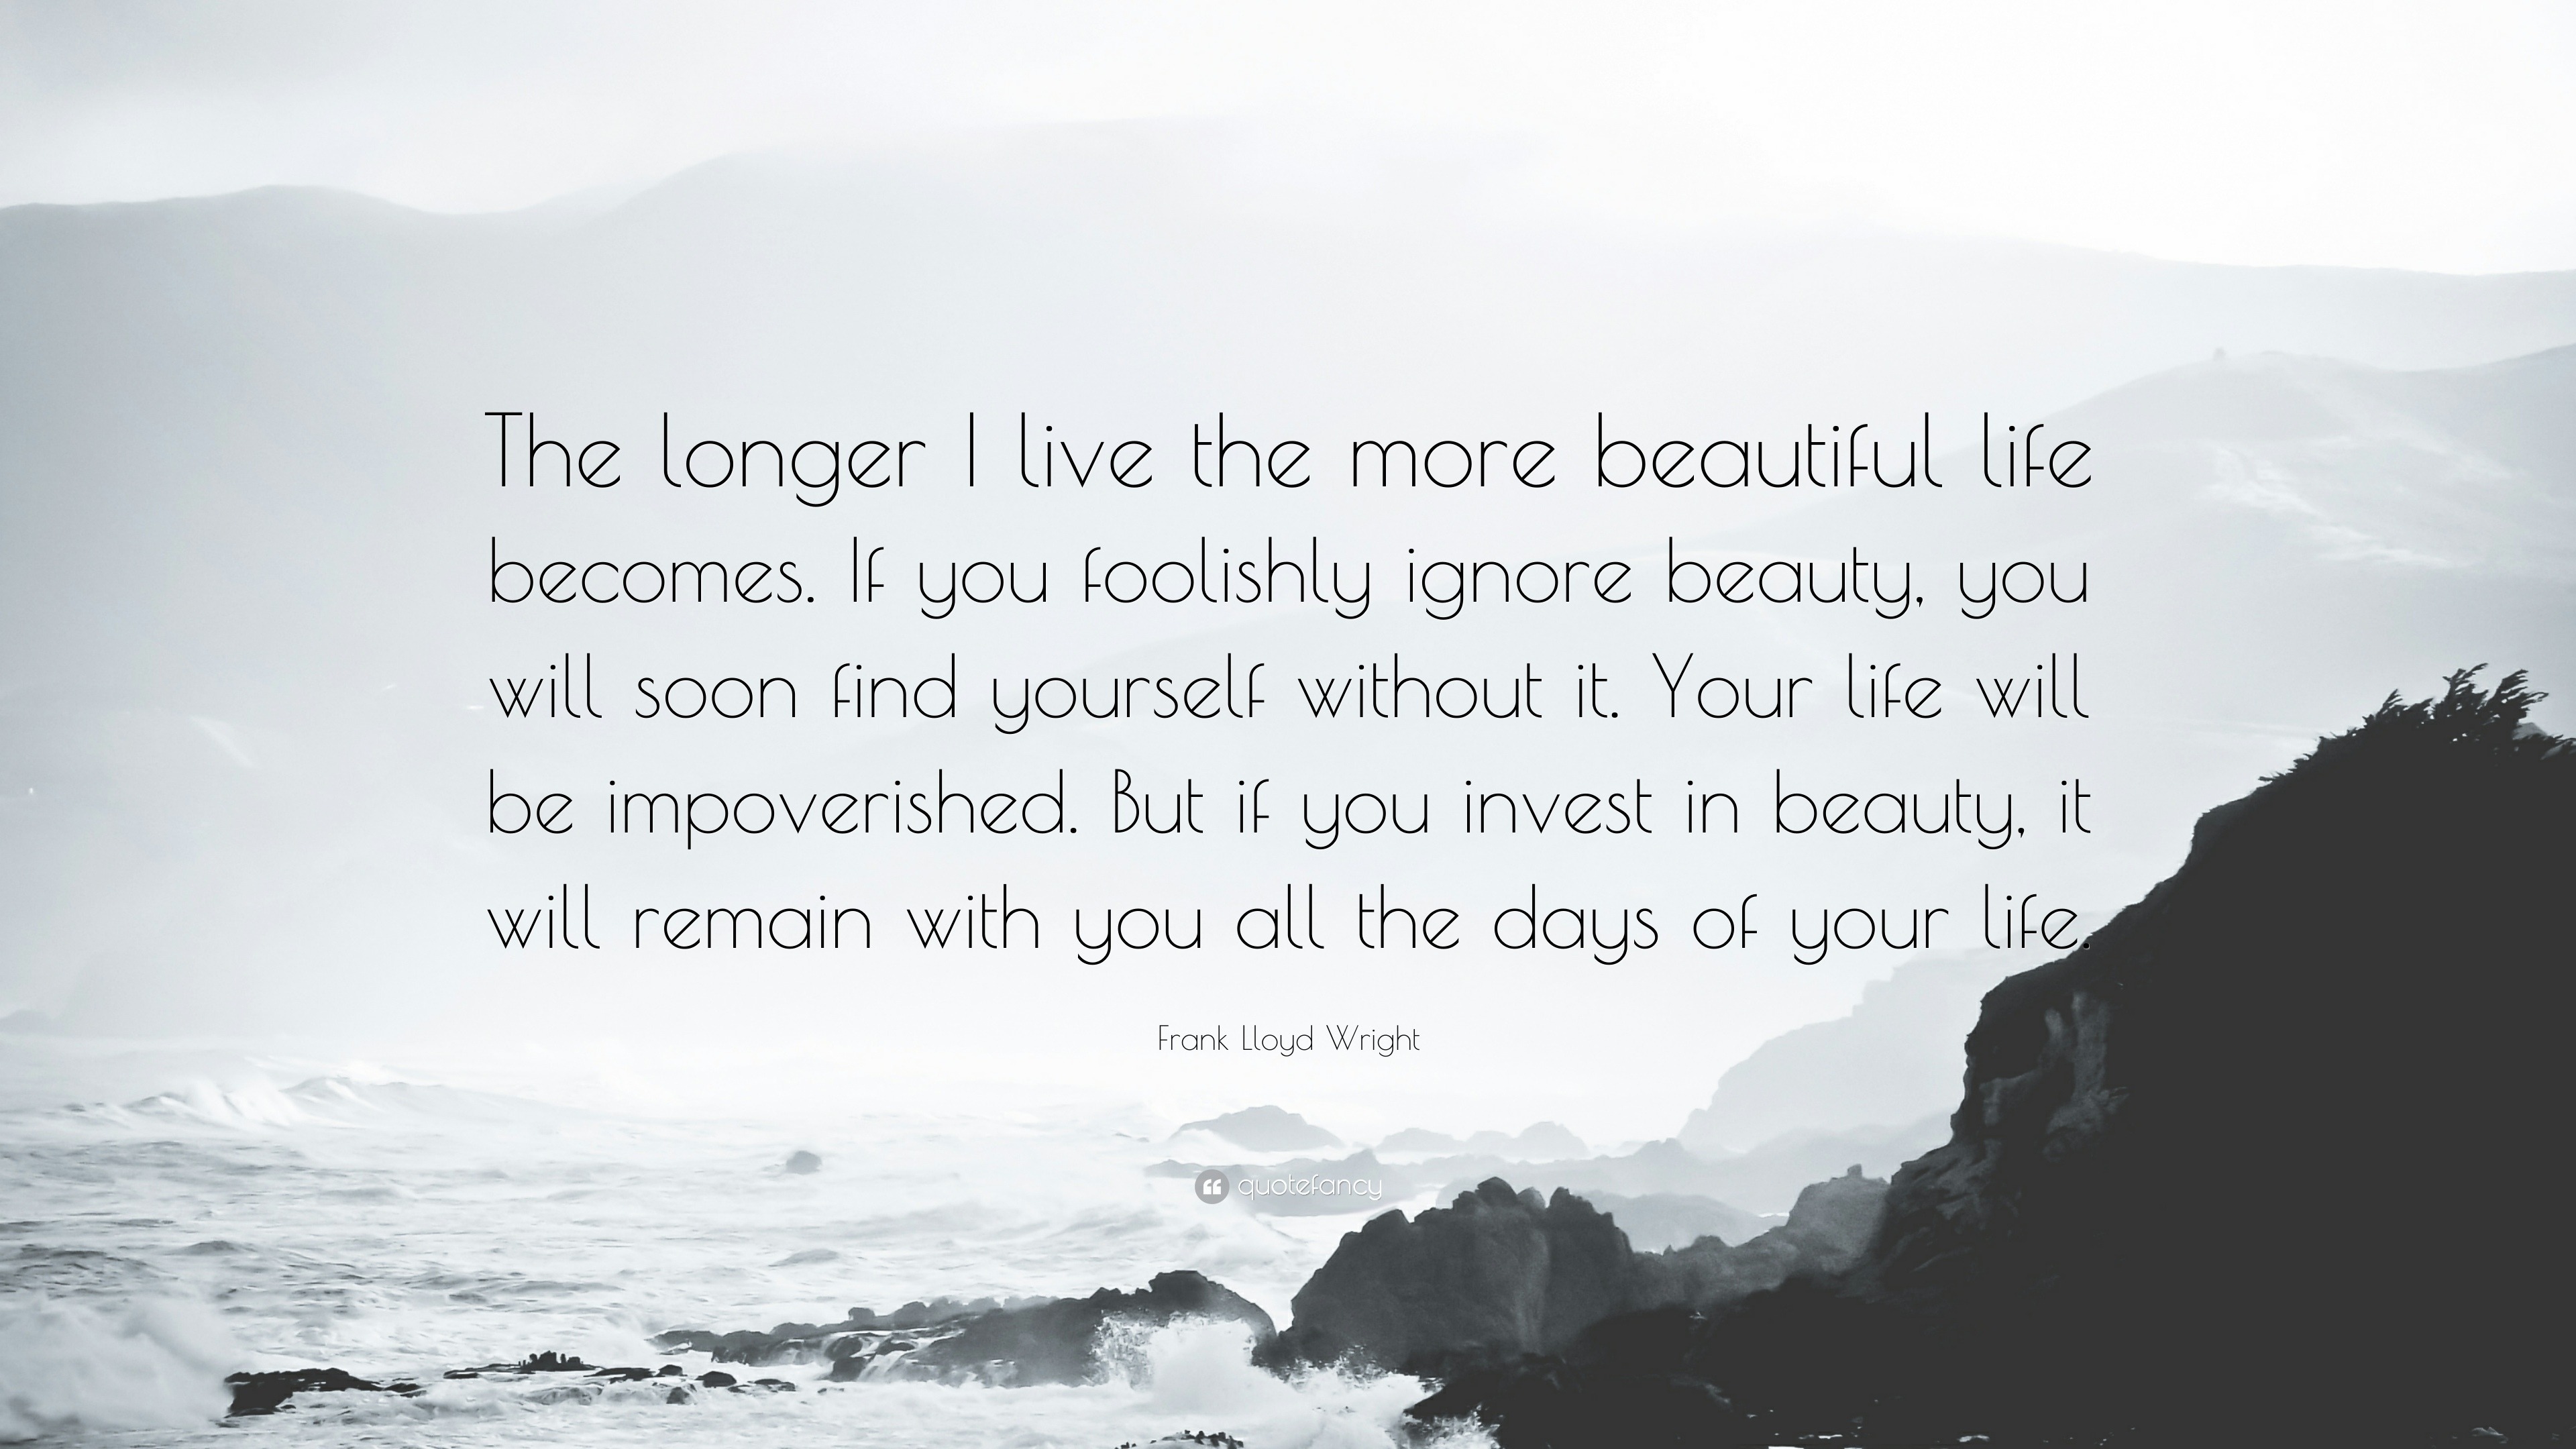 Frank Lloyd Wright Quote “The longer I live the more beautiful life be es